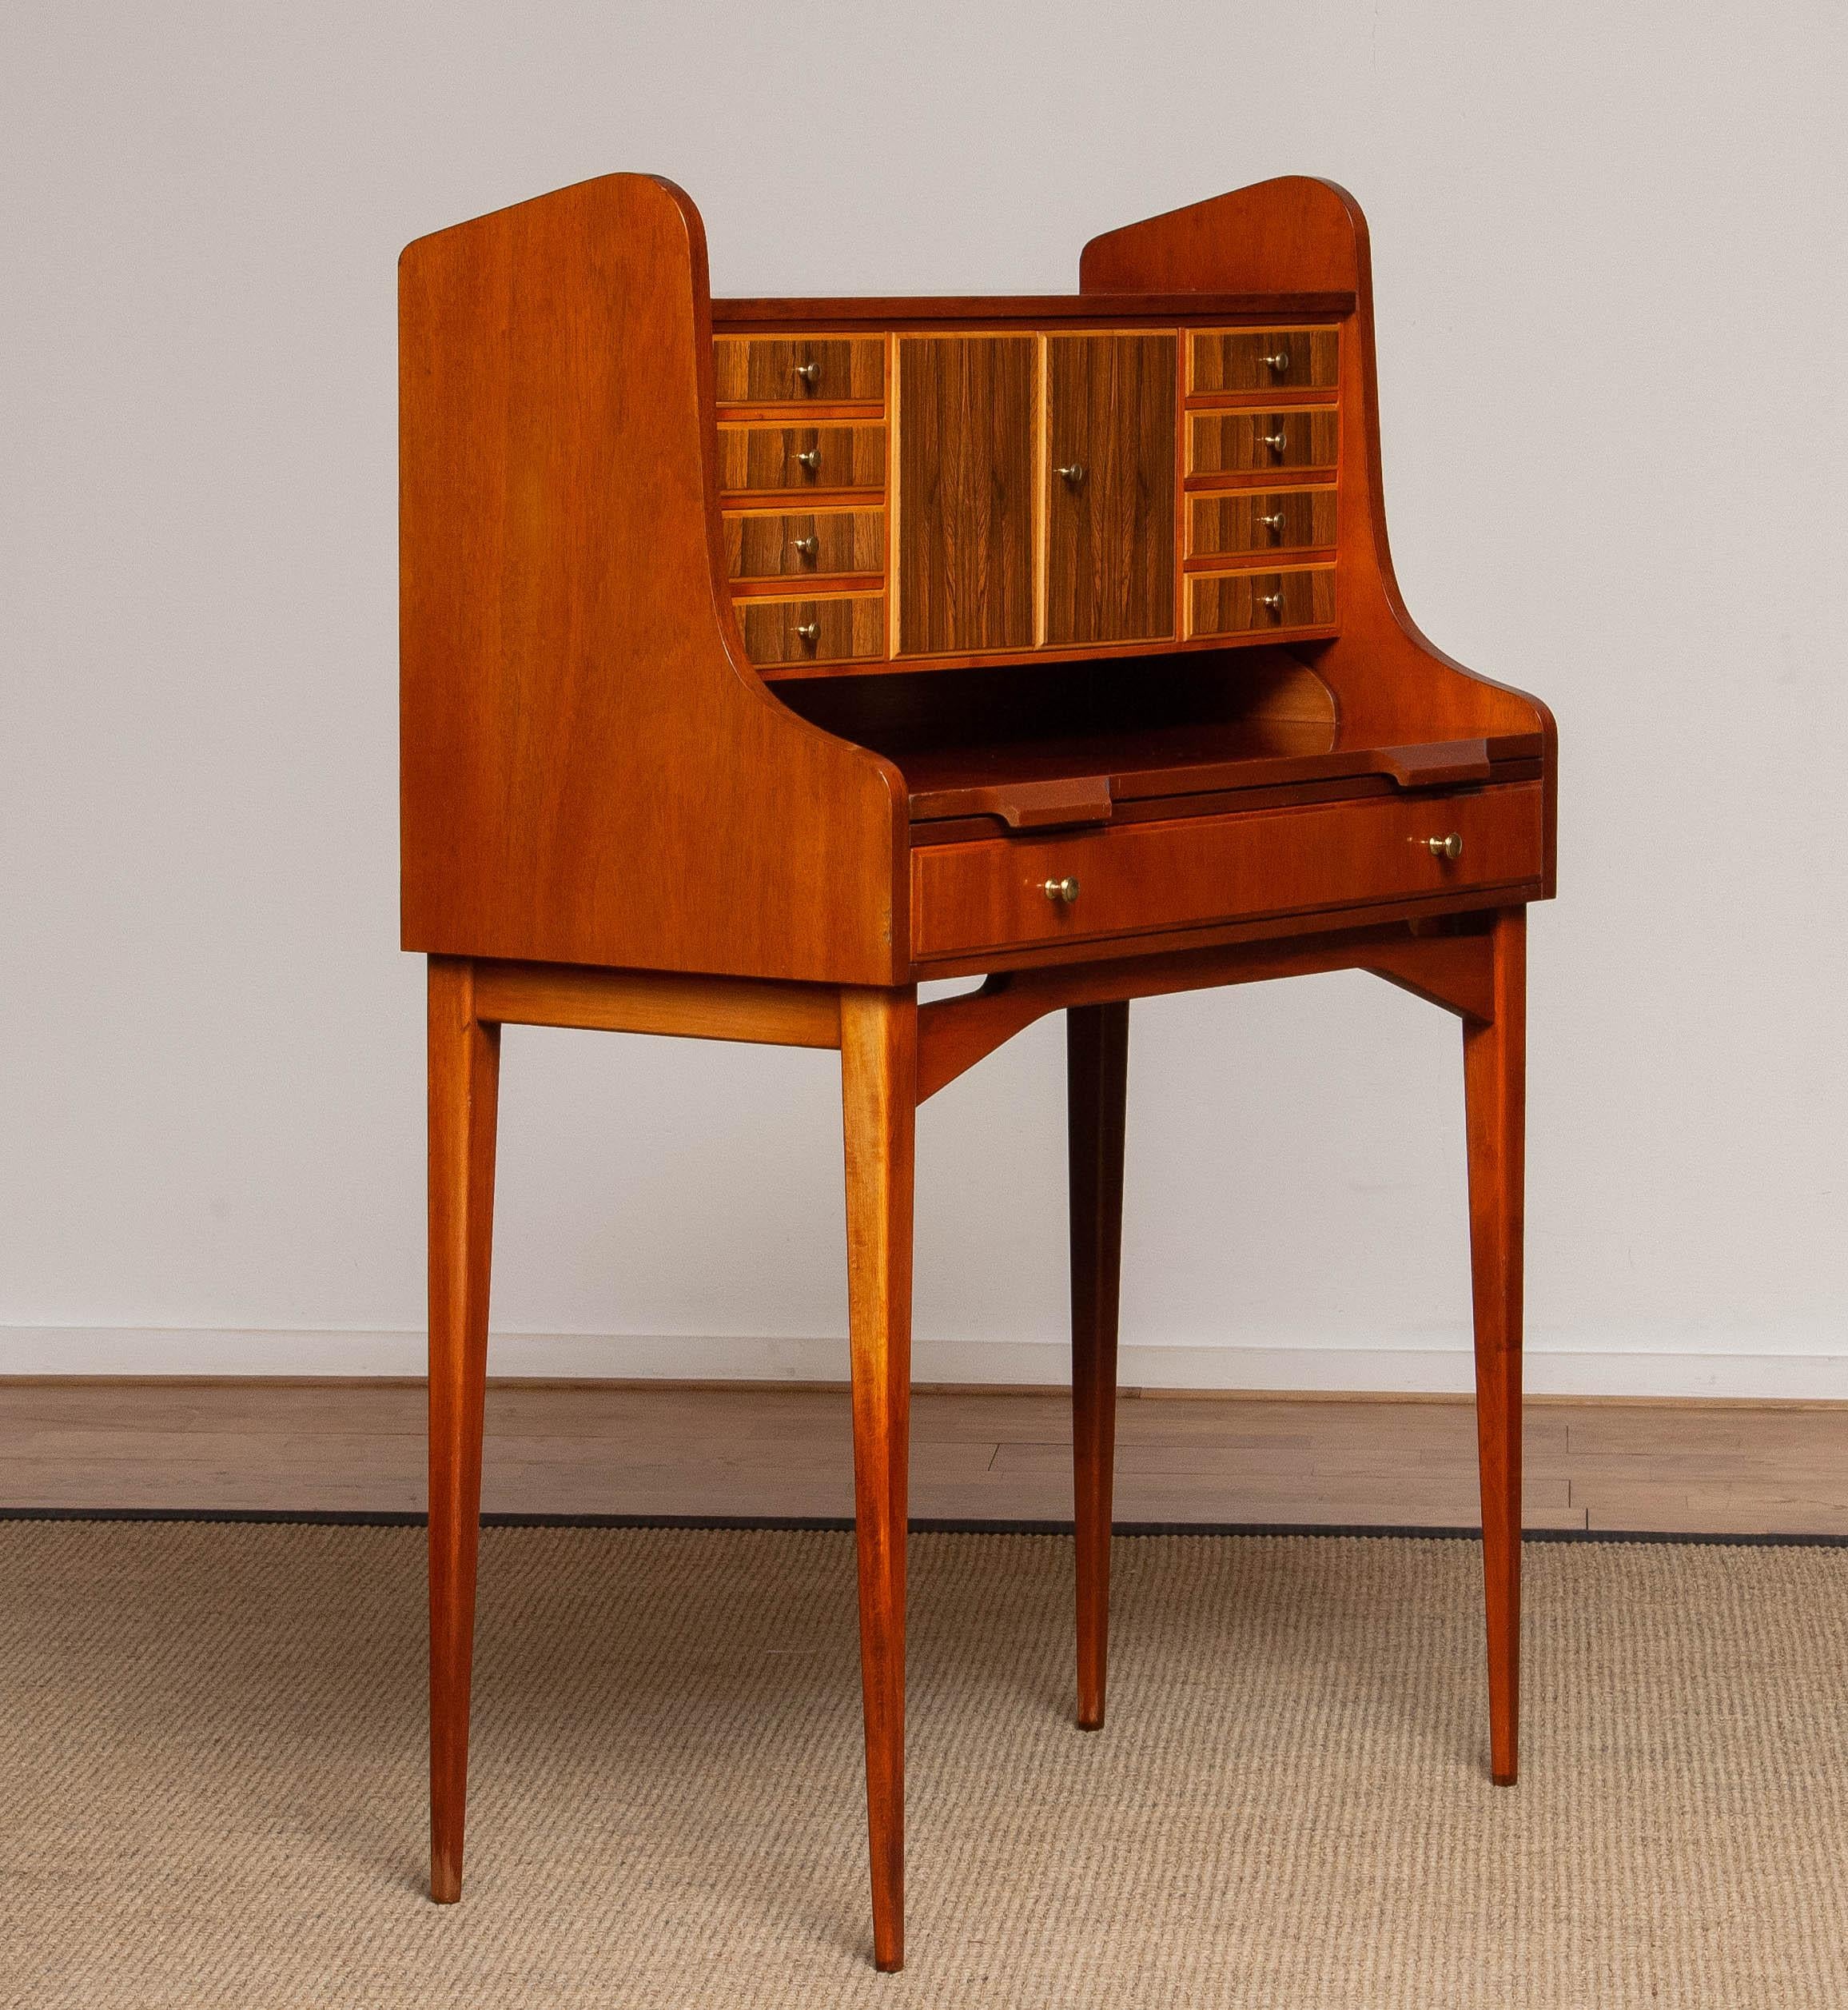 '60s Slim Leg Secrétaire / Vanity with Inlay of Elm and Walnut, Sweden For Sale 8